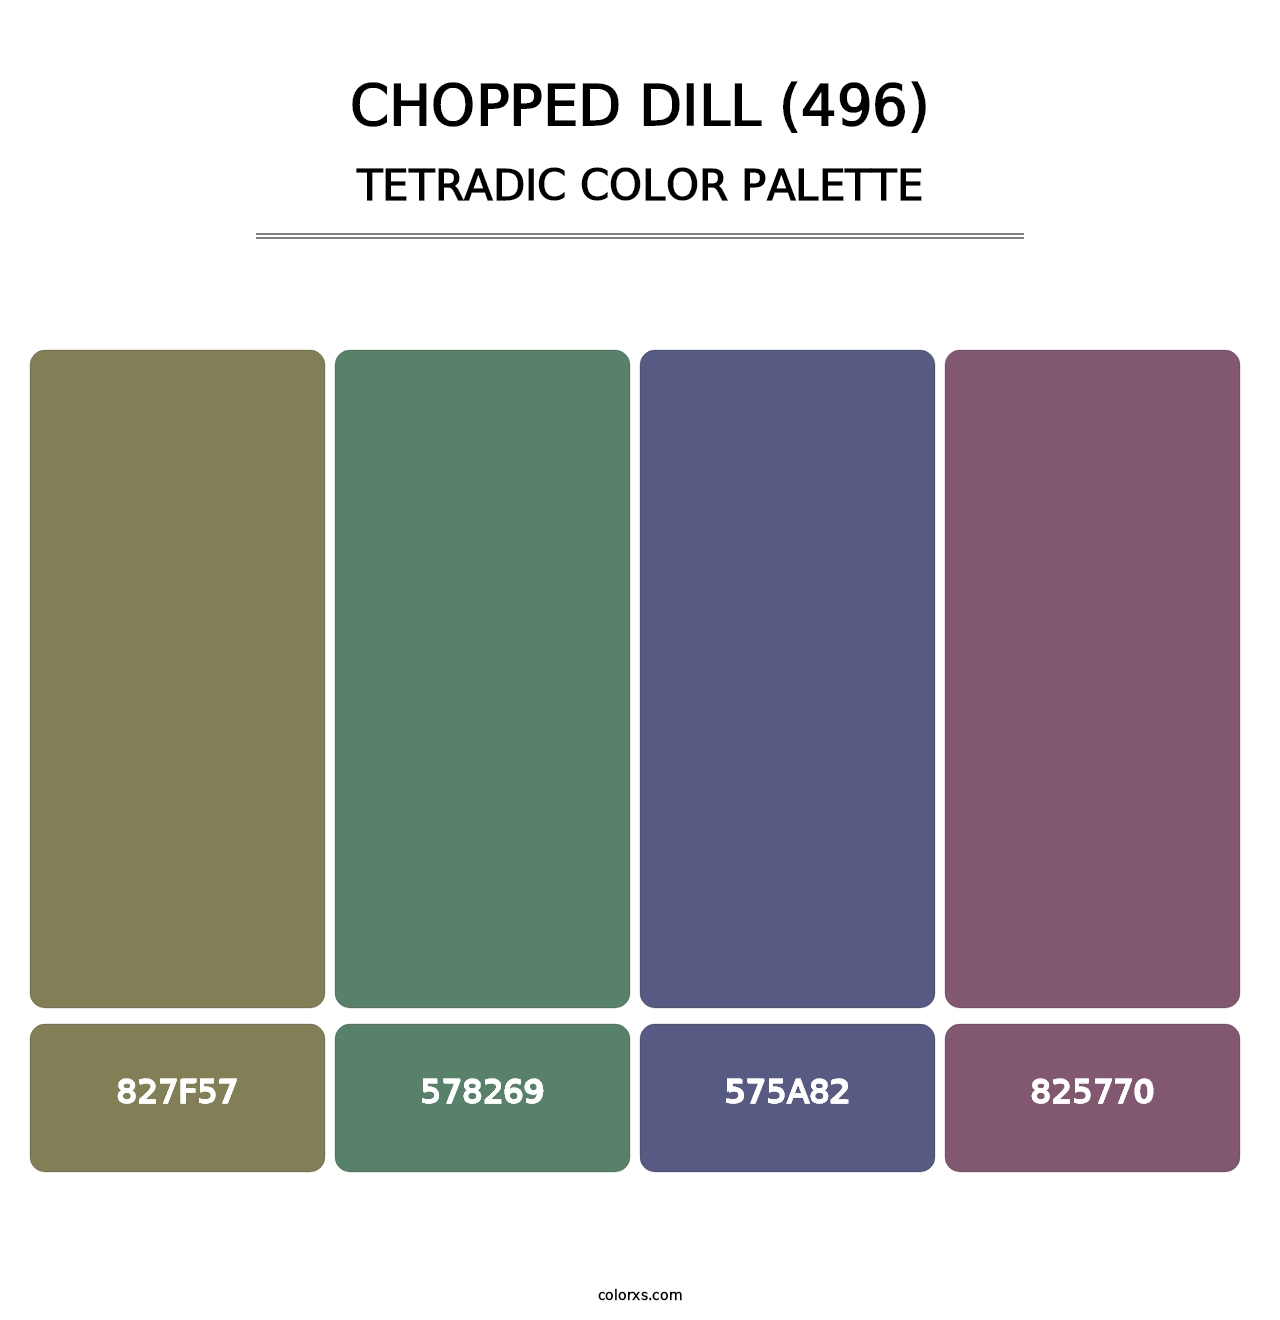 Chopped Dill (496) - Tetradic Color Palette